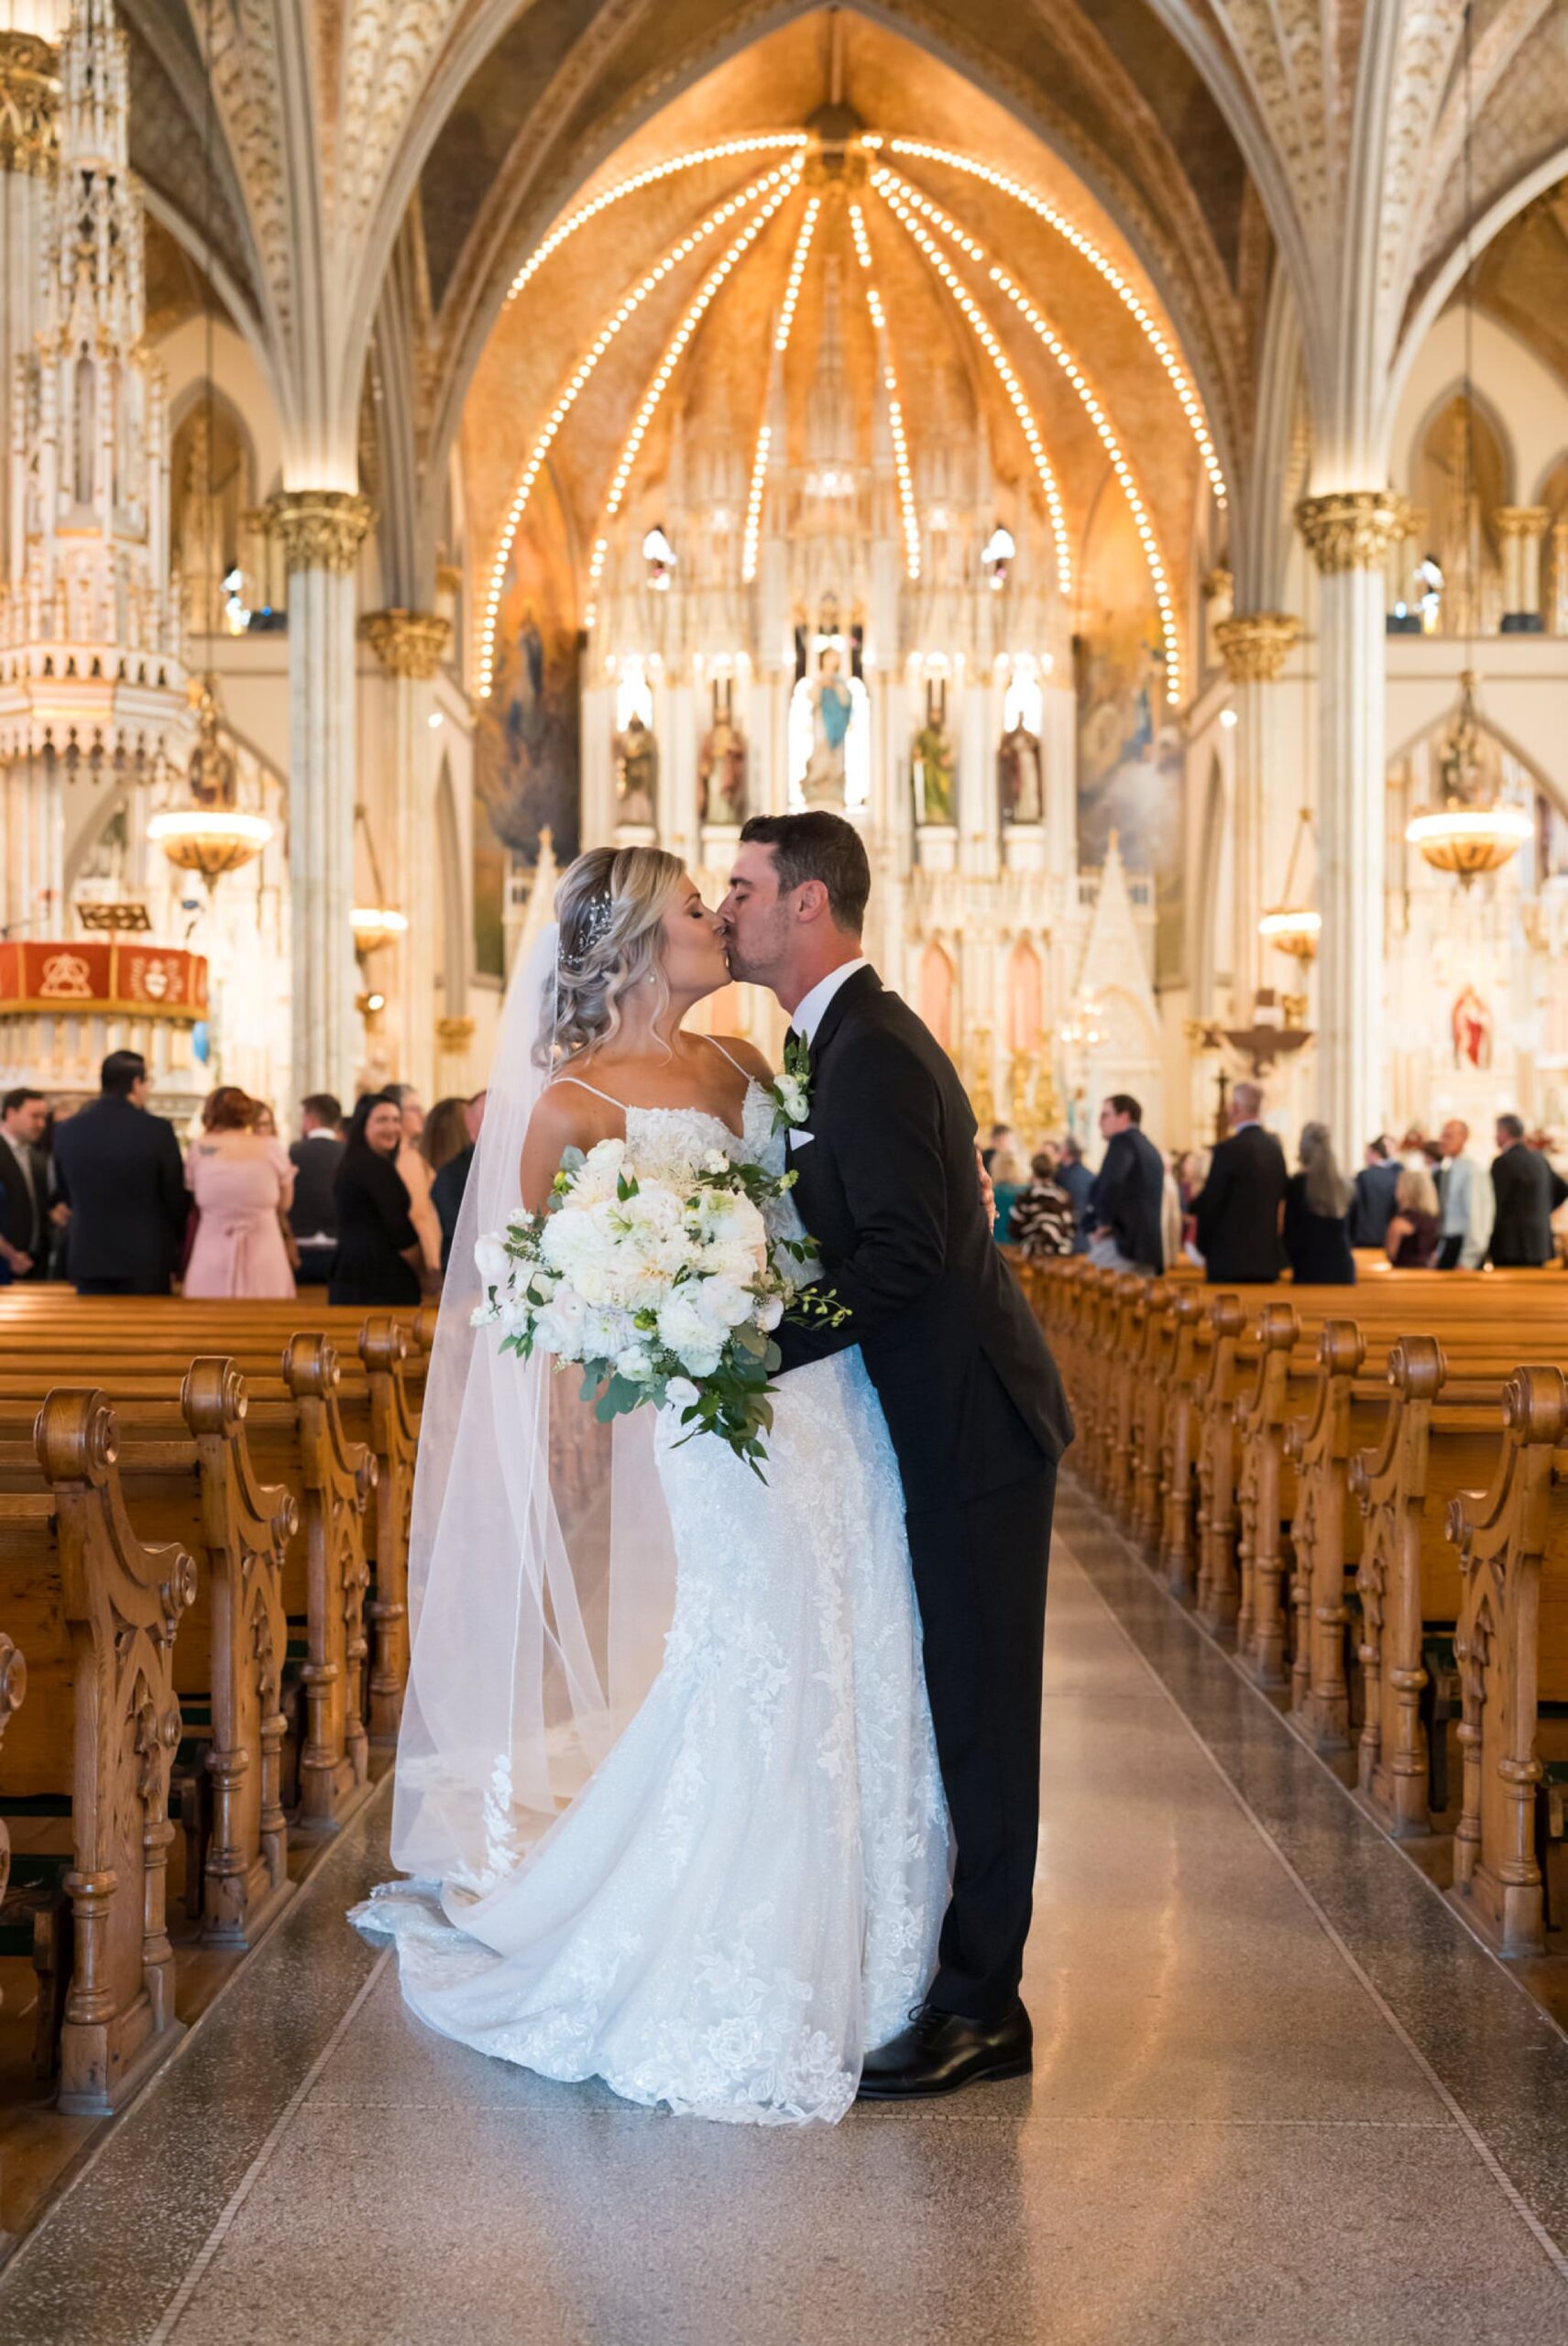 A bride and groom kiss in the center aisle of Detroit's Sweetest Heart of Mary Catholic Church on their wedding day.  